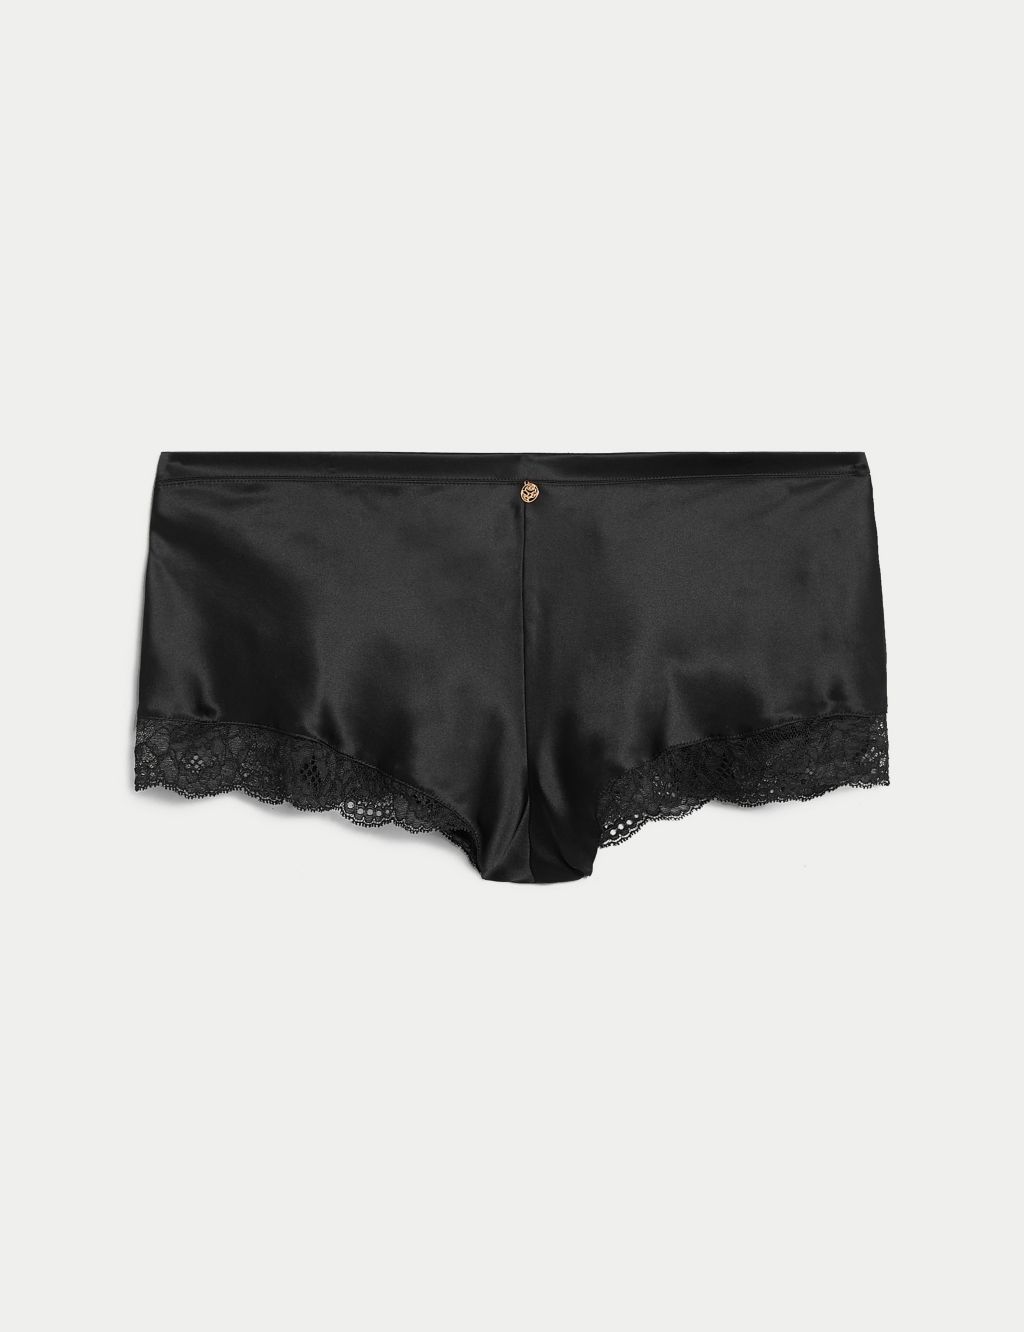 Silk & Lace French Knickers image 2